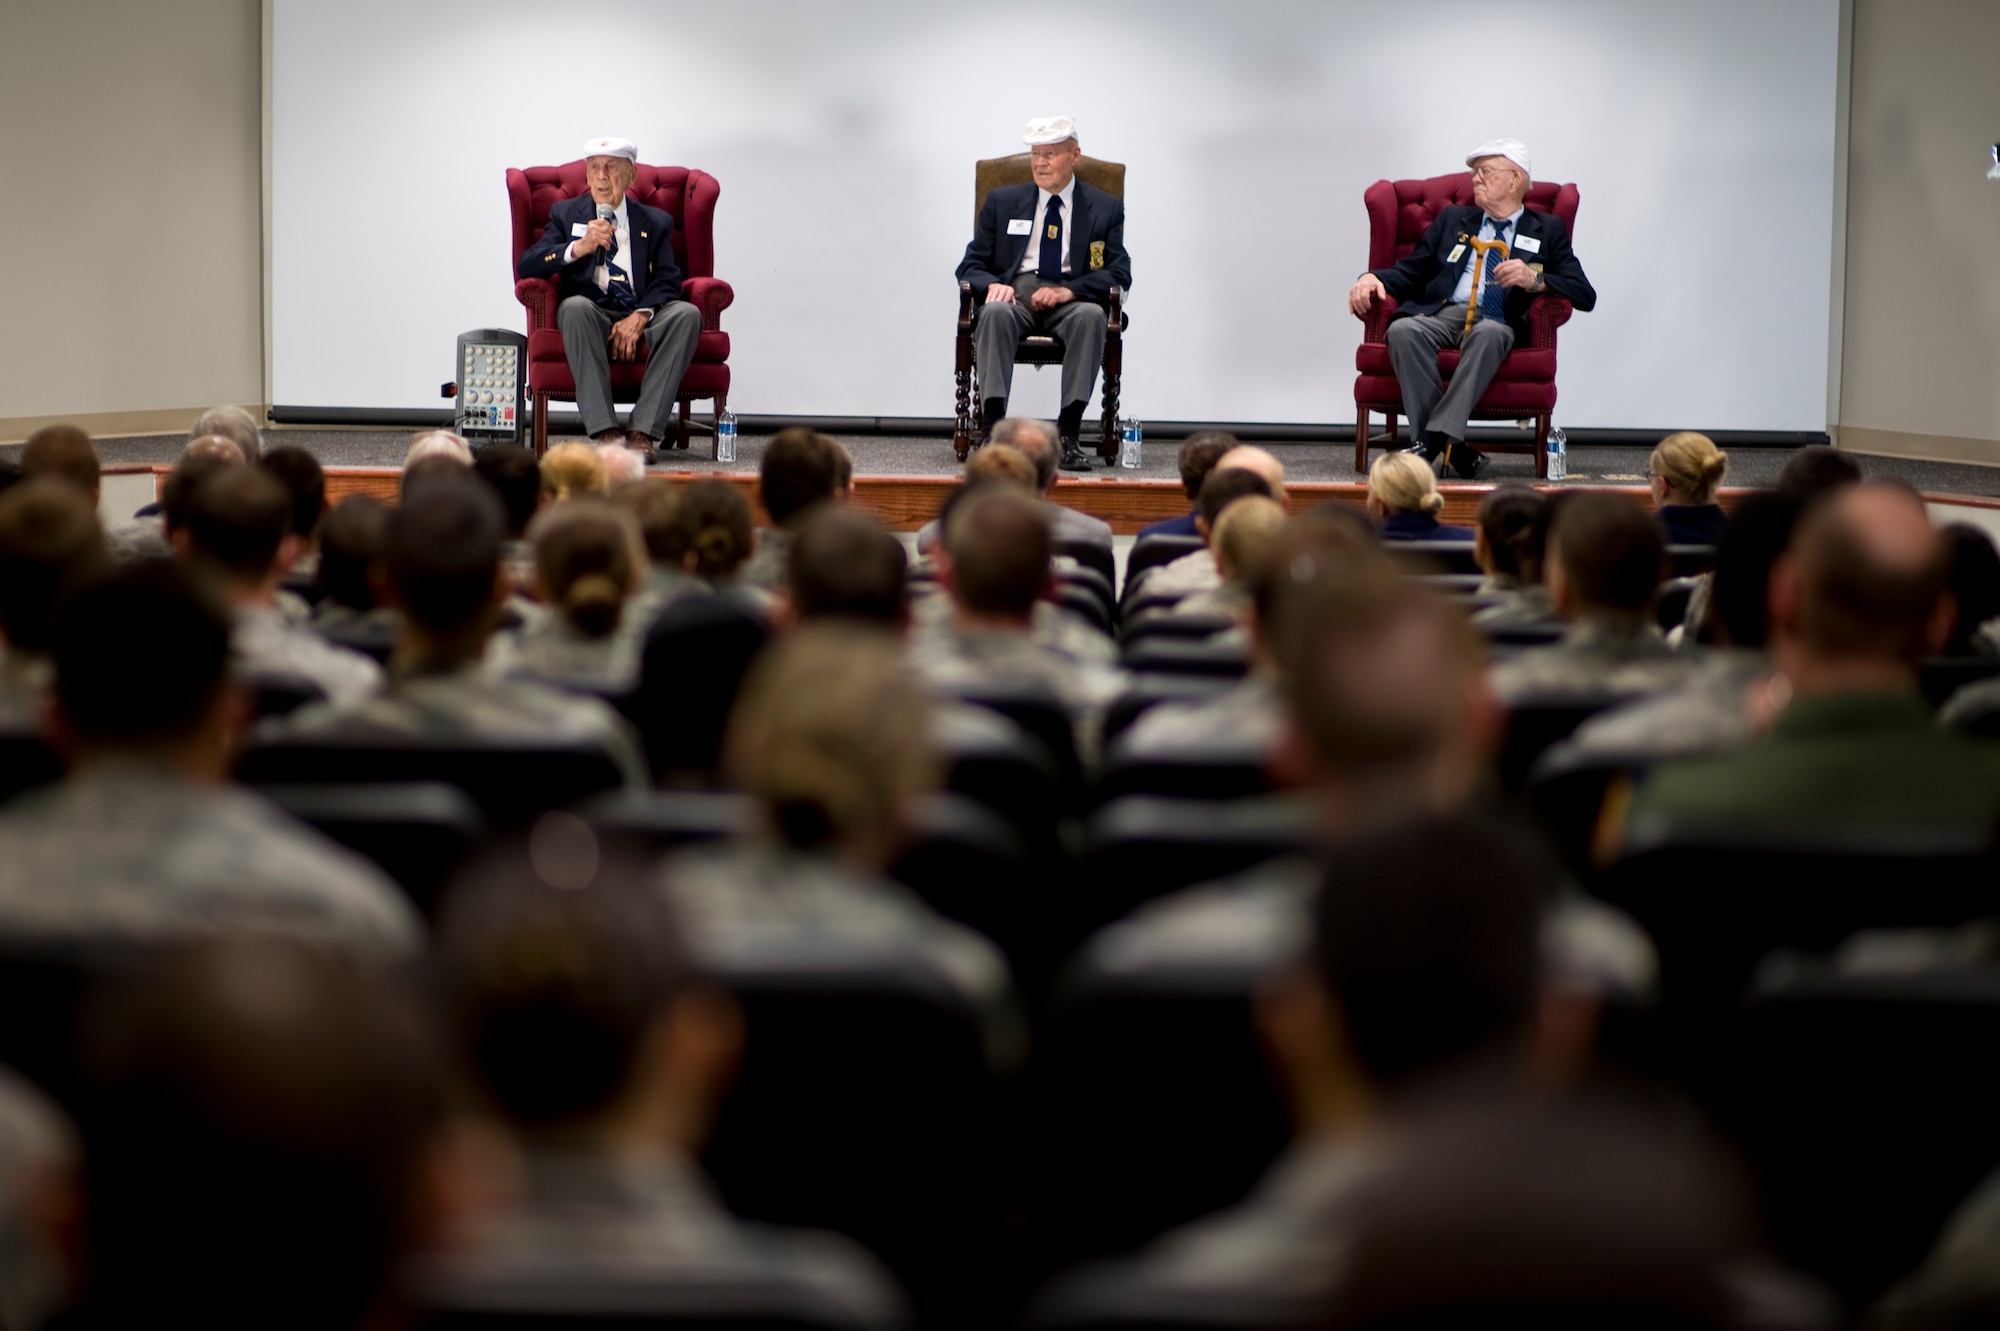 Retired U.S. Air Force Lt. Col Richard Cole, left, Staff Sgt. David Thatcher, center, and Lt. Col. Edward Saylor, right, all of the Doolittle Raiders, answer questions from Hurlburt Field Airmen at the 319th Special Operations Squadron auditorium at Hurlburt Field, Fla., April 18, 2013. The surviving Doolittle Raiders visited Fort Walton Beach, Fla., for their reunion tour as part of the 71st anniversary of this historic mission. (U.S. Air Force Photo/Airman 1st Class Hayden K. Hyatt)